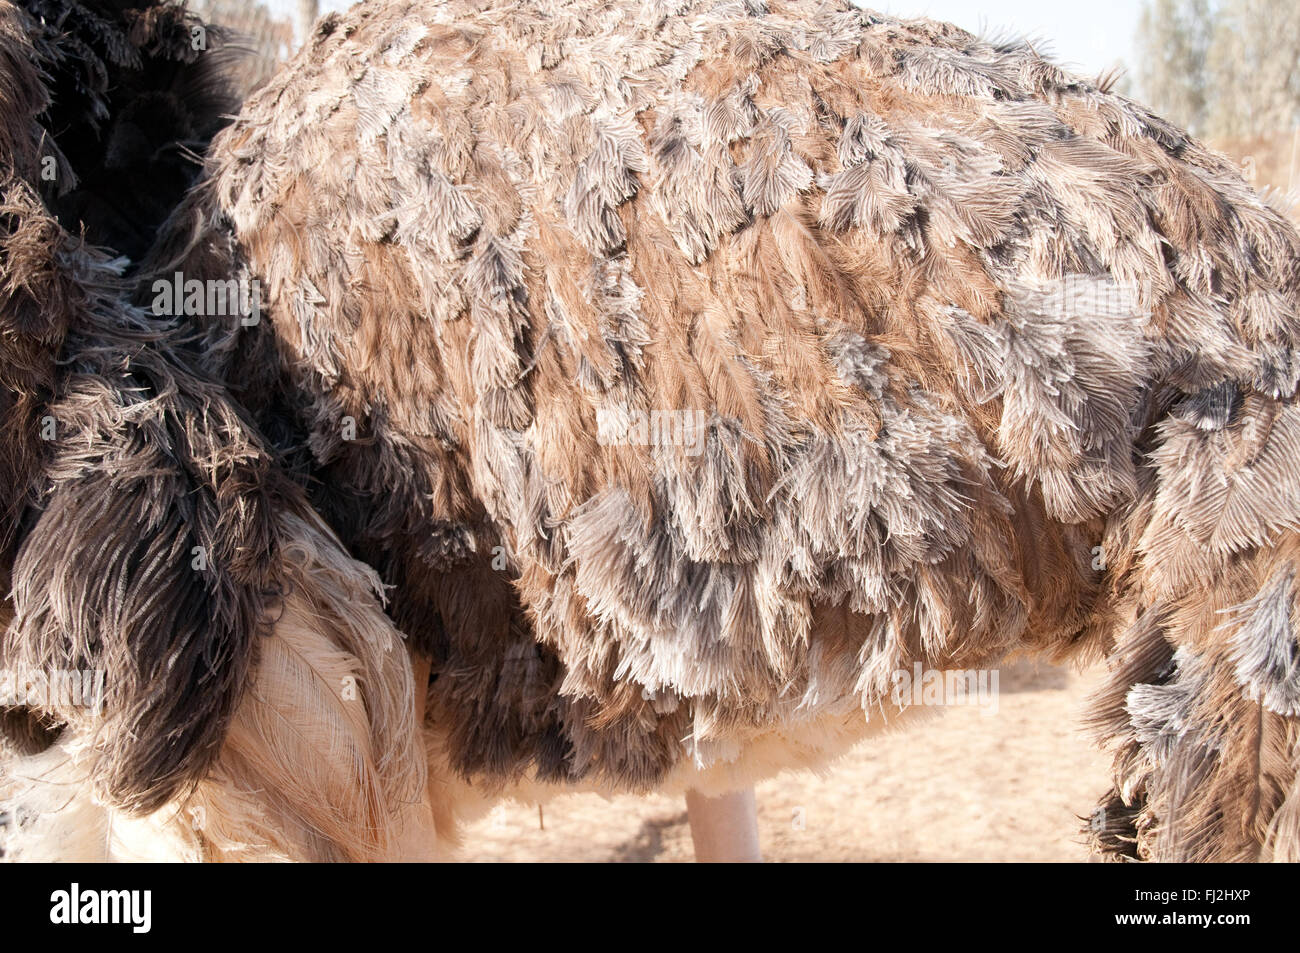 A close-up of the wing and feathers of a Somali ostrich living in captivity at the Shaumari Wildlife Reserve near Azraq, Jordan, Middle East. Stock Photo